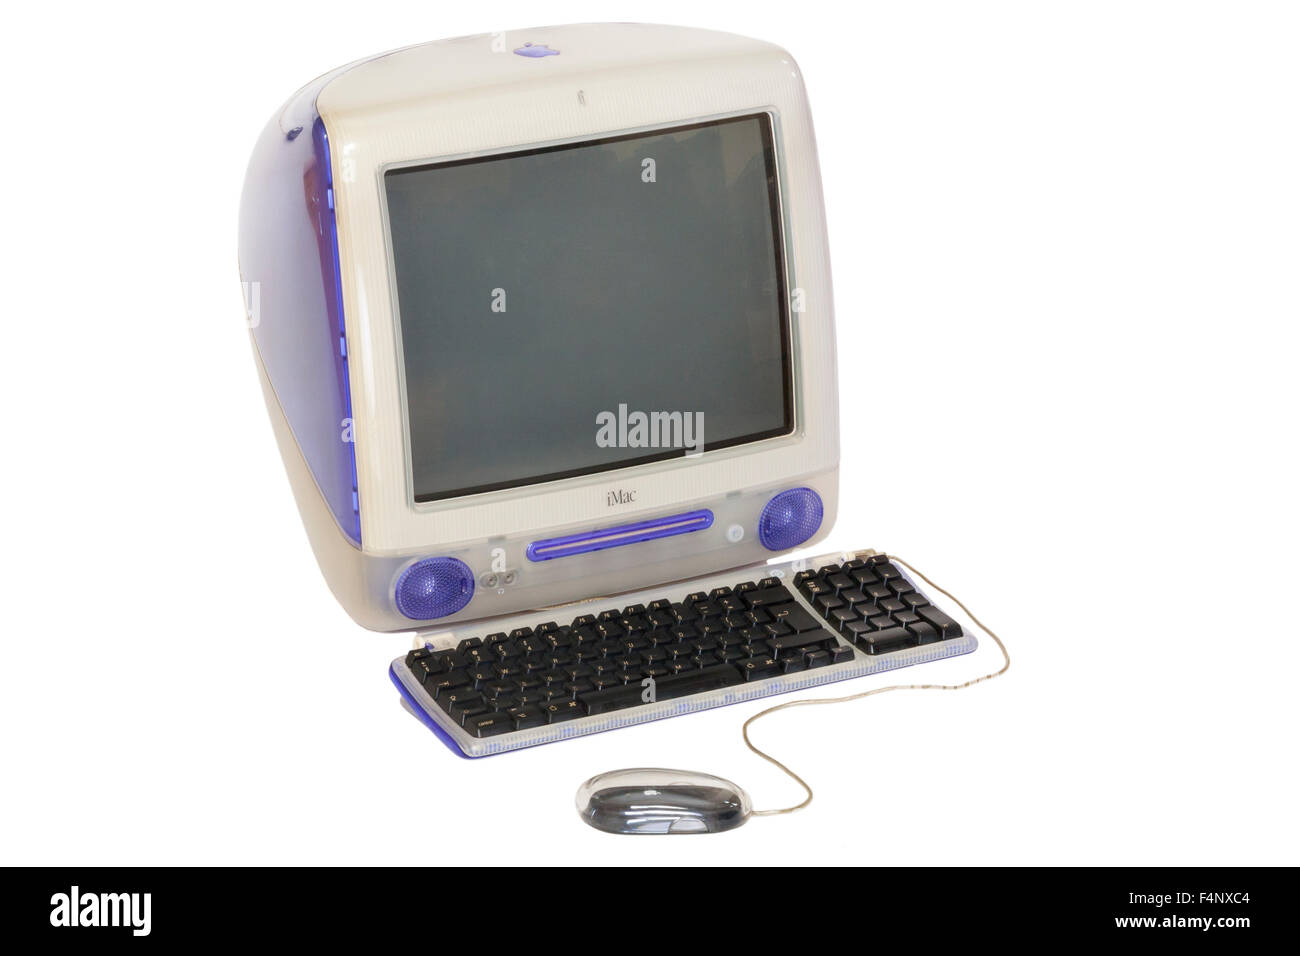 Original / old Apple iMac personal desk top computer Power PC G3 model with CRT type screen, late 1990's model running Mac OS 9. Stock Photo